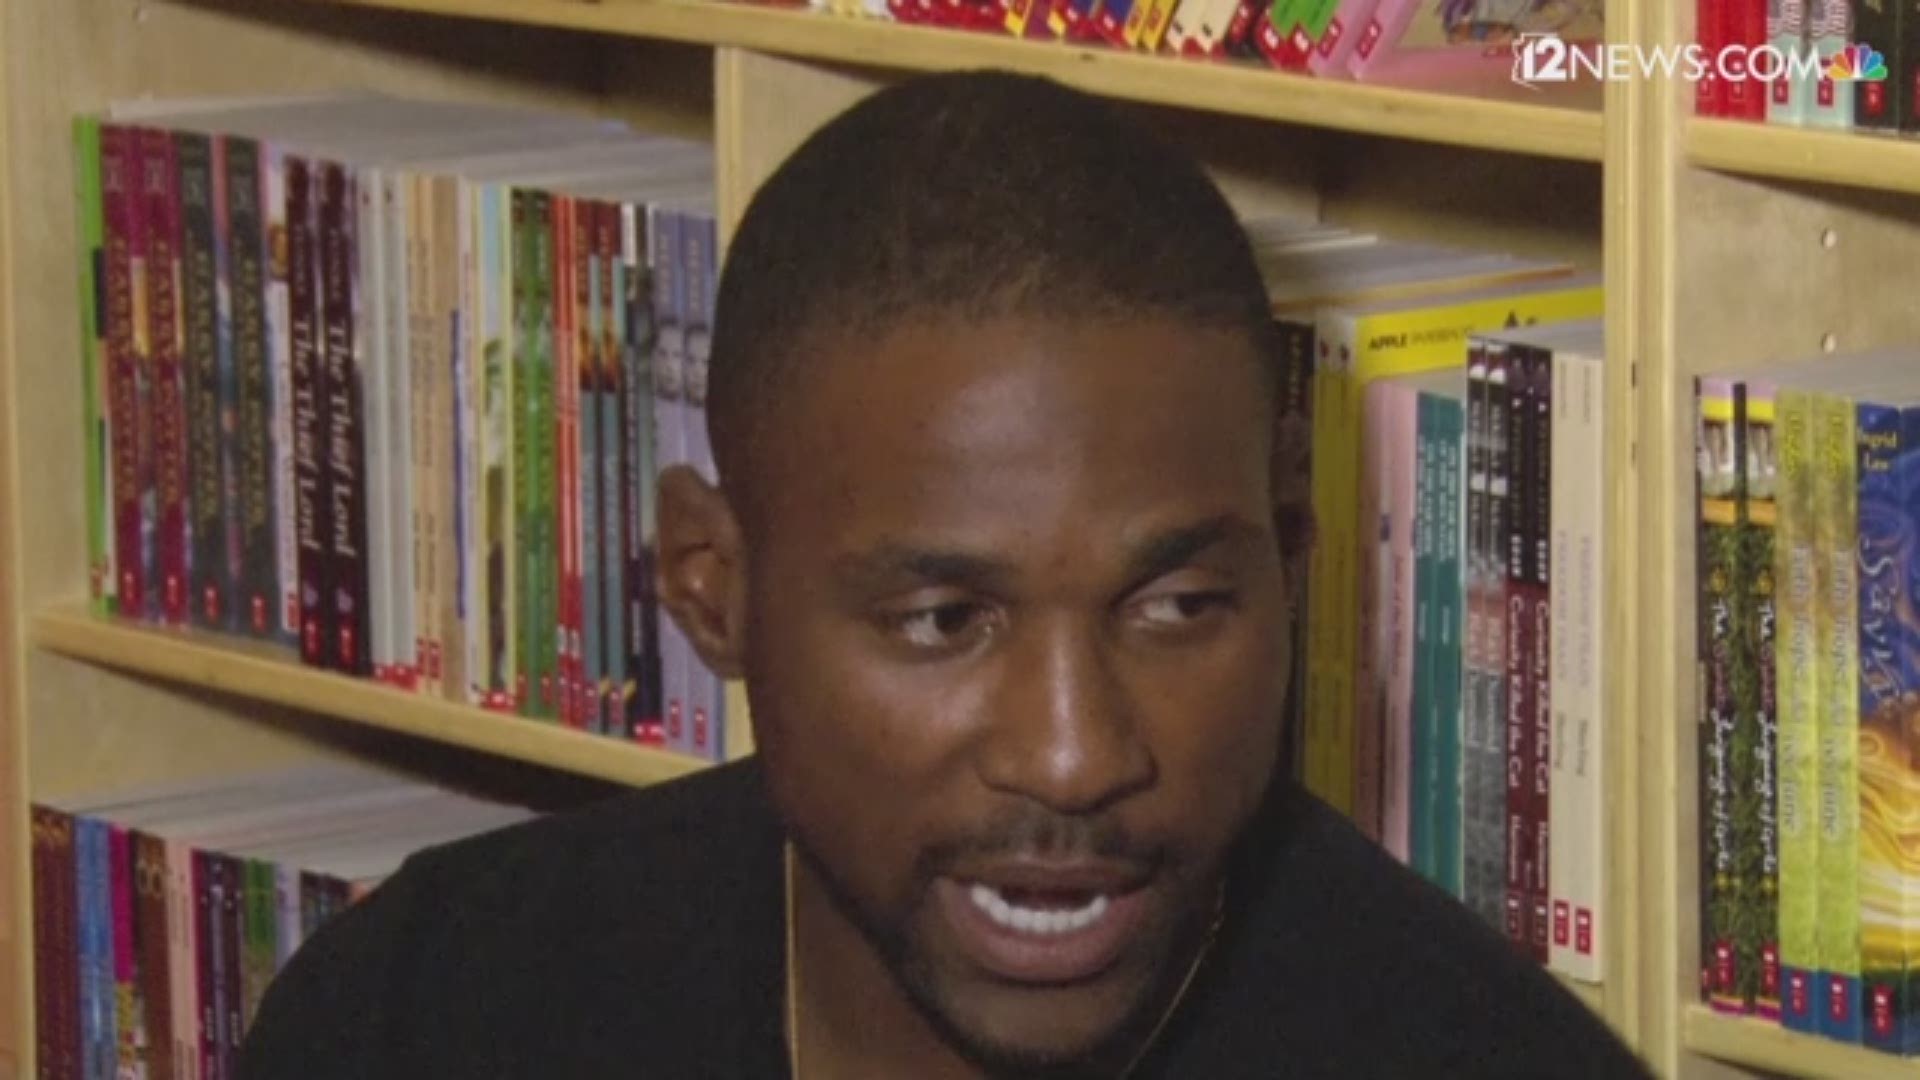 12 News anchor Paul Gerke sat down with Patrick Peterson to talk family and his favorite sport at "Patrick's Corner" at Nevitt Elementary School in Phoenix.